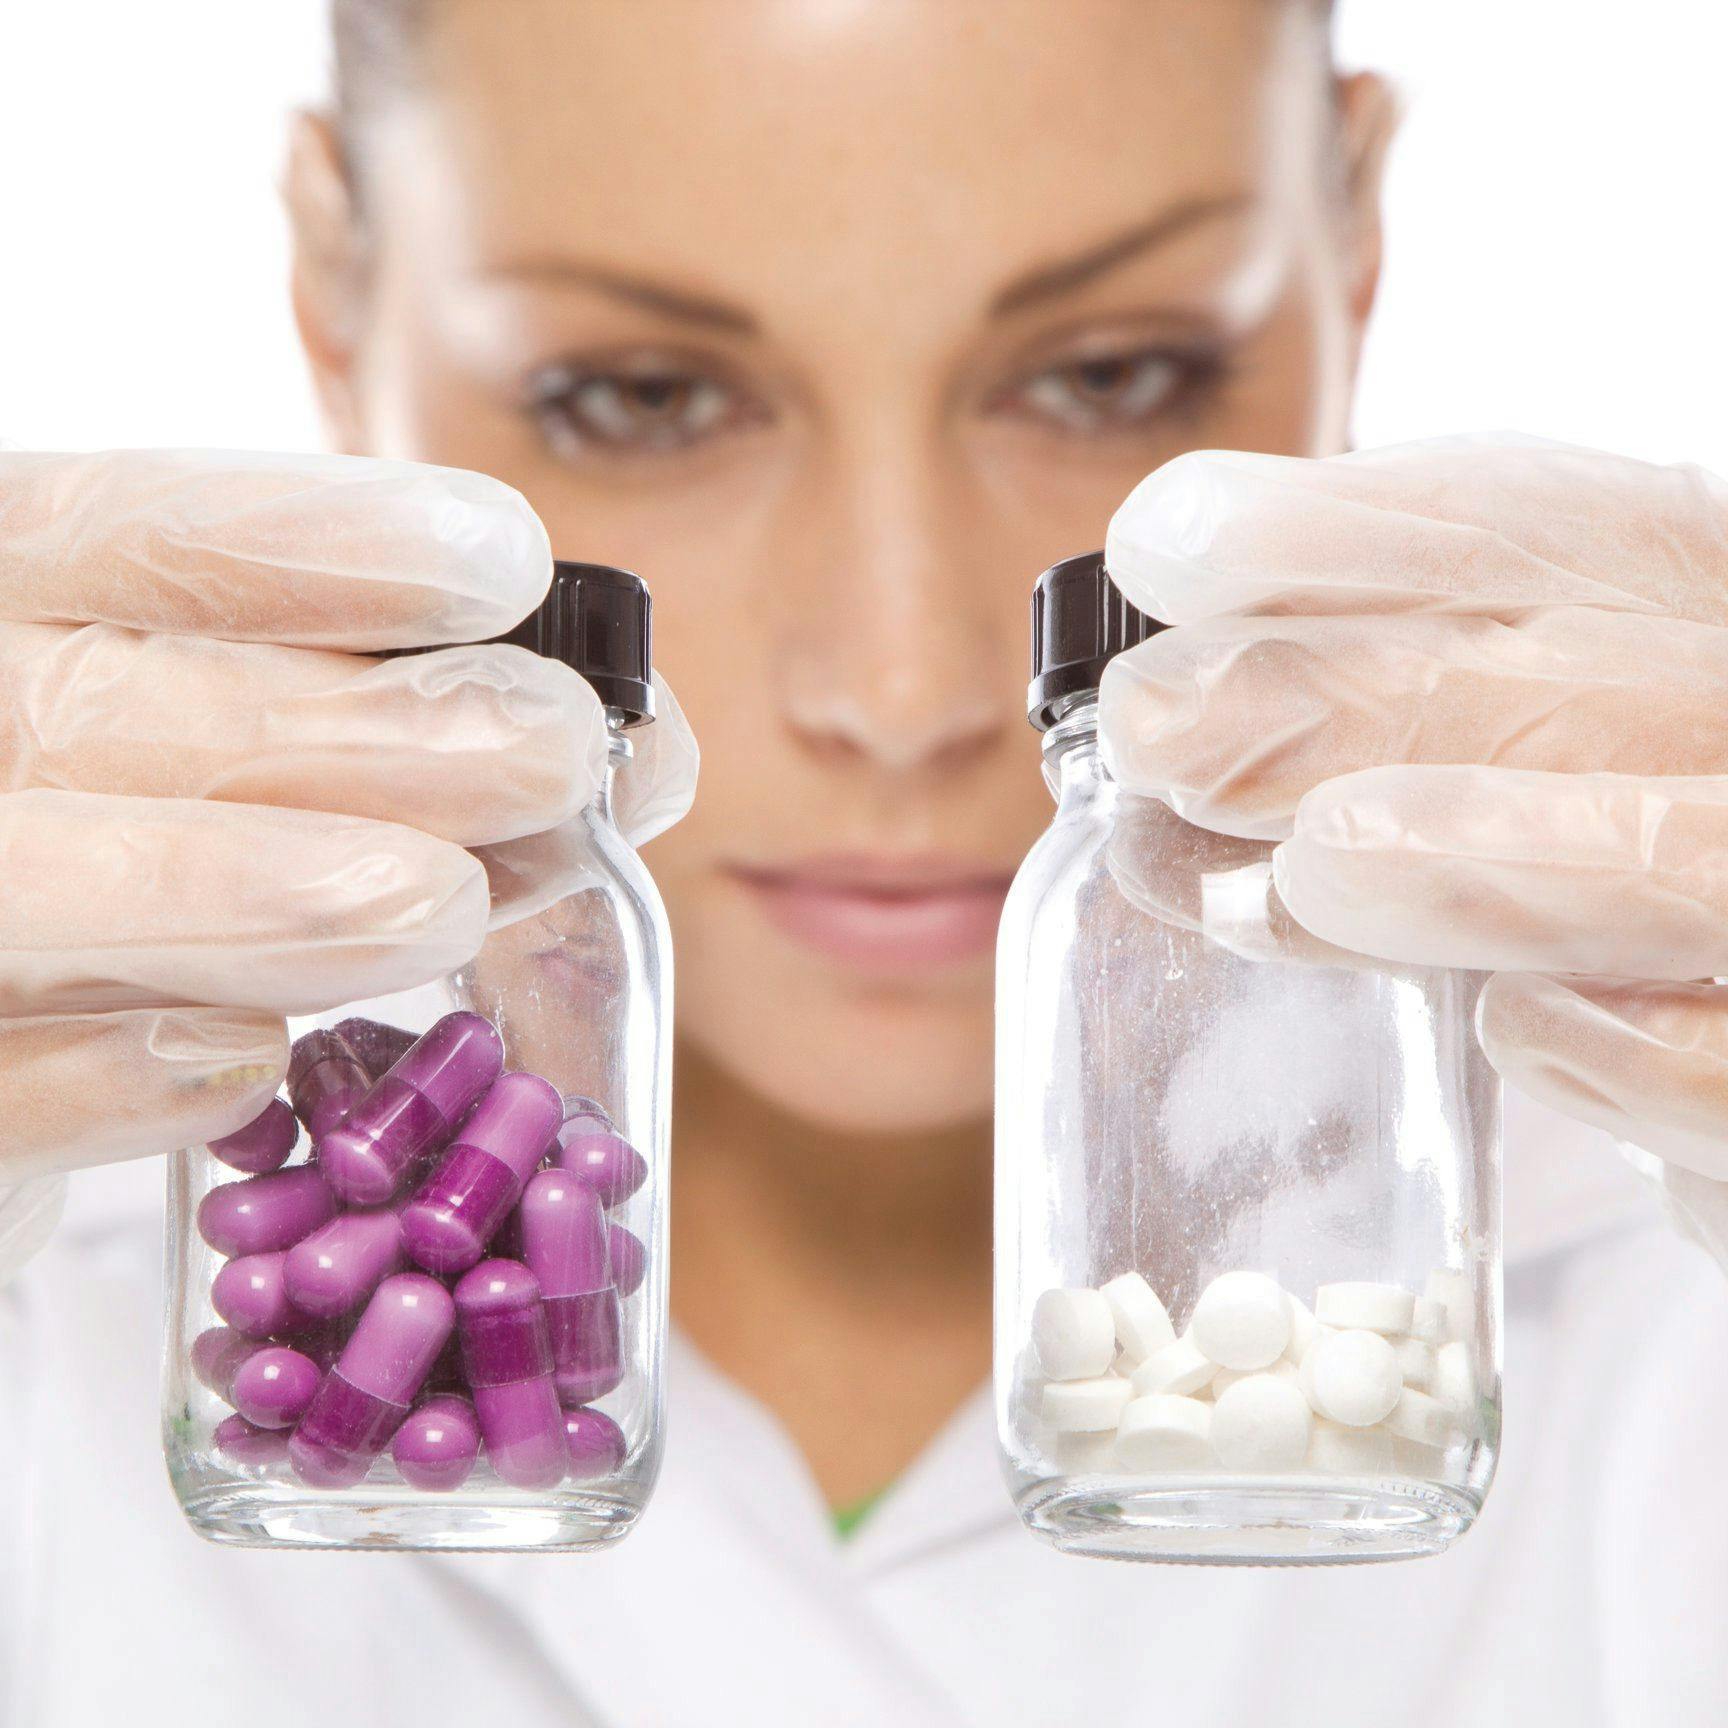 Drugs vs. Dietary Supplements: Head-to-Head Science